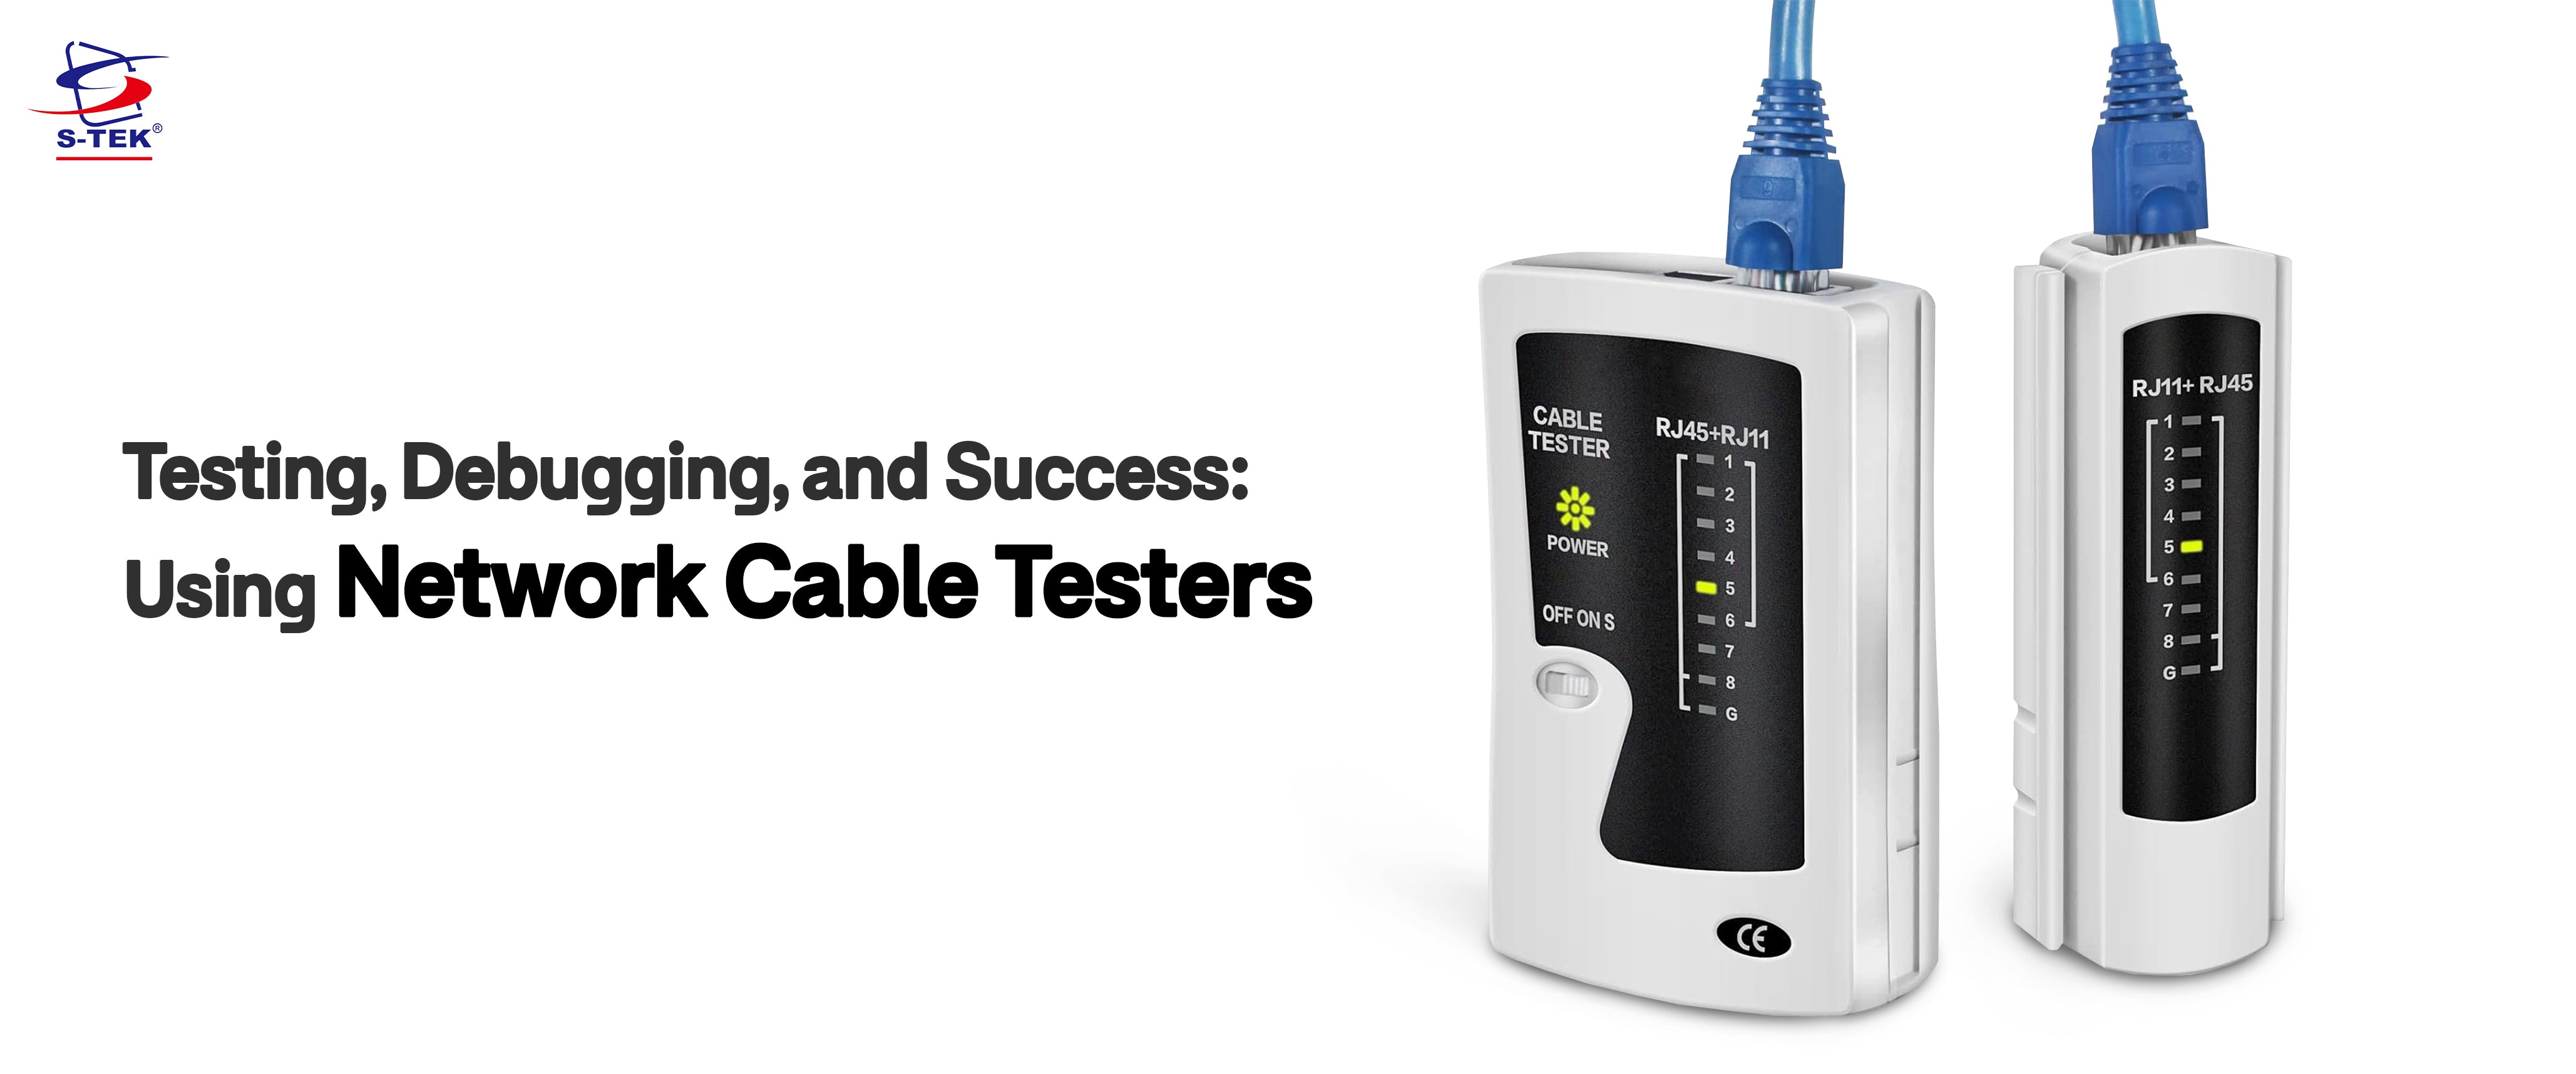 Testing, Debugging, and Success: Using Network Cable Tester